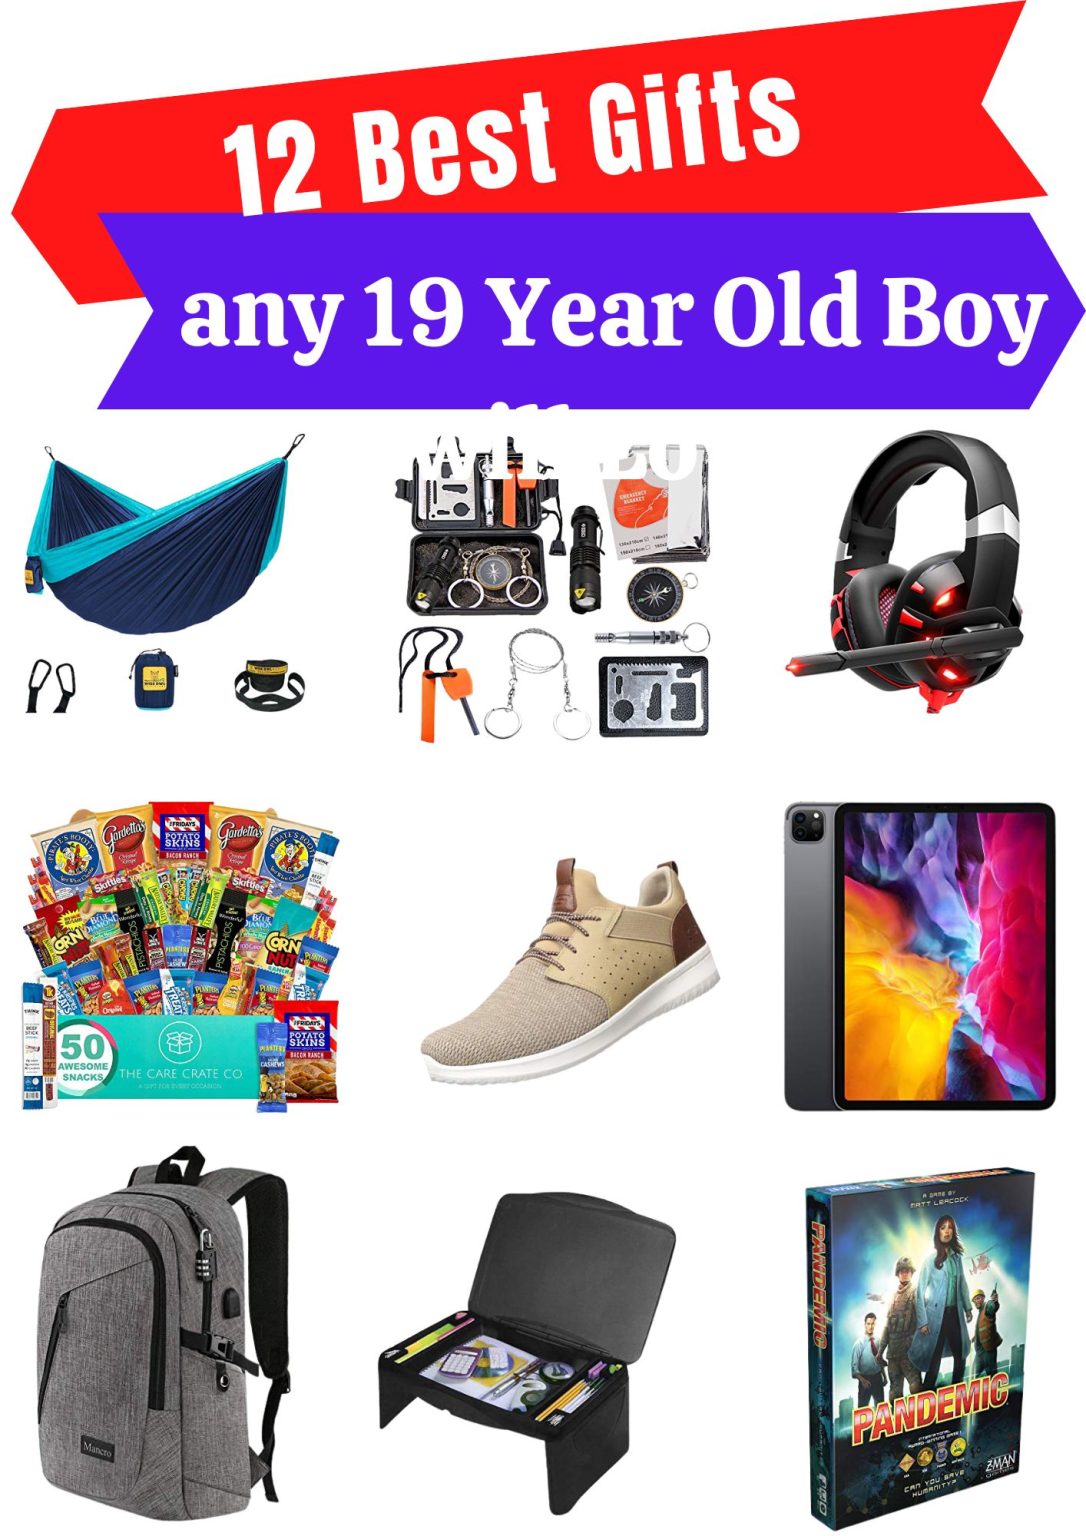 12 Best Gift Ideas for 19 Year Old Boys | GiftCollector